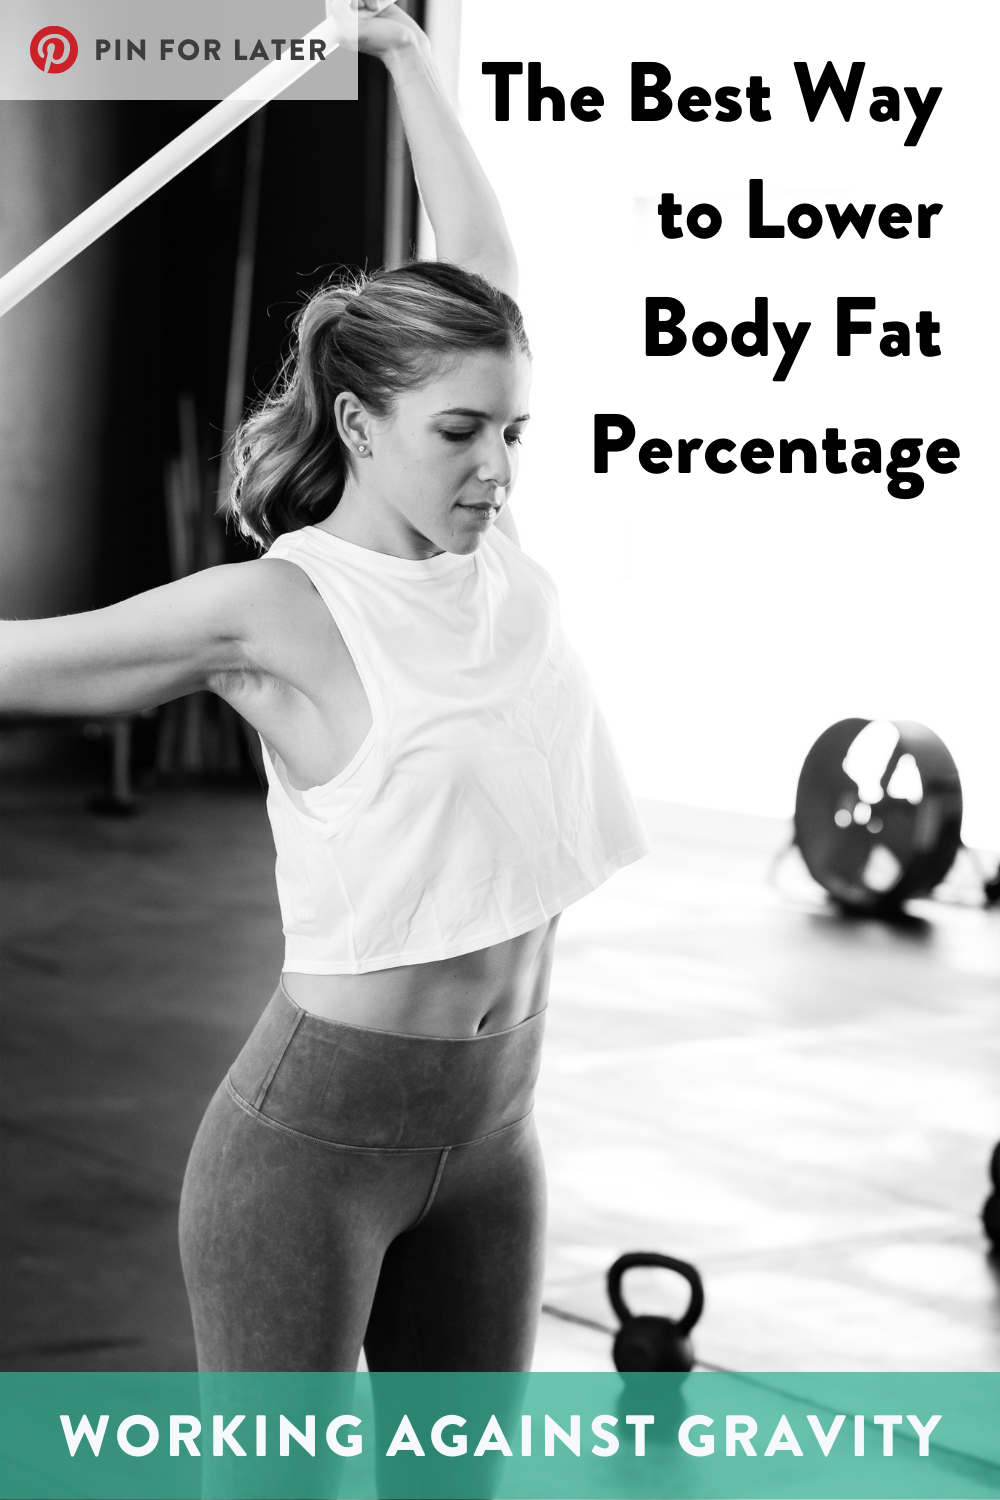 How To Measure Body Fat Reliably: 5 Ways In 2024